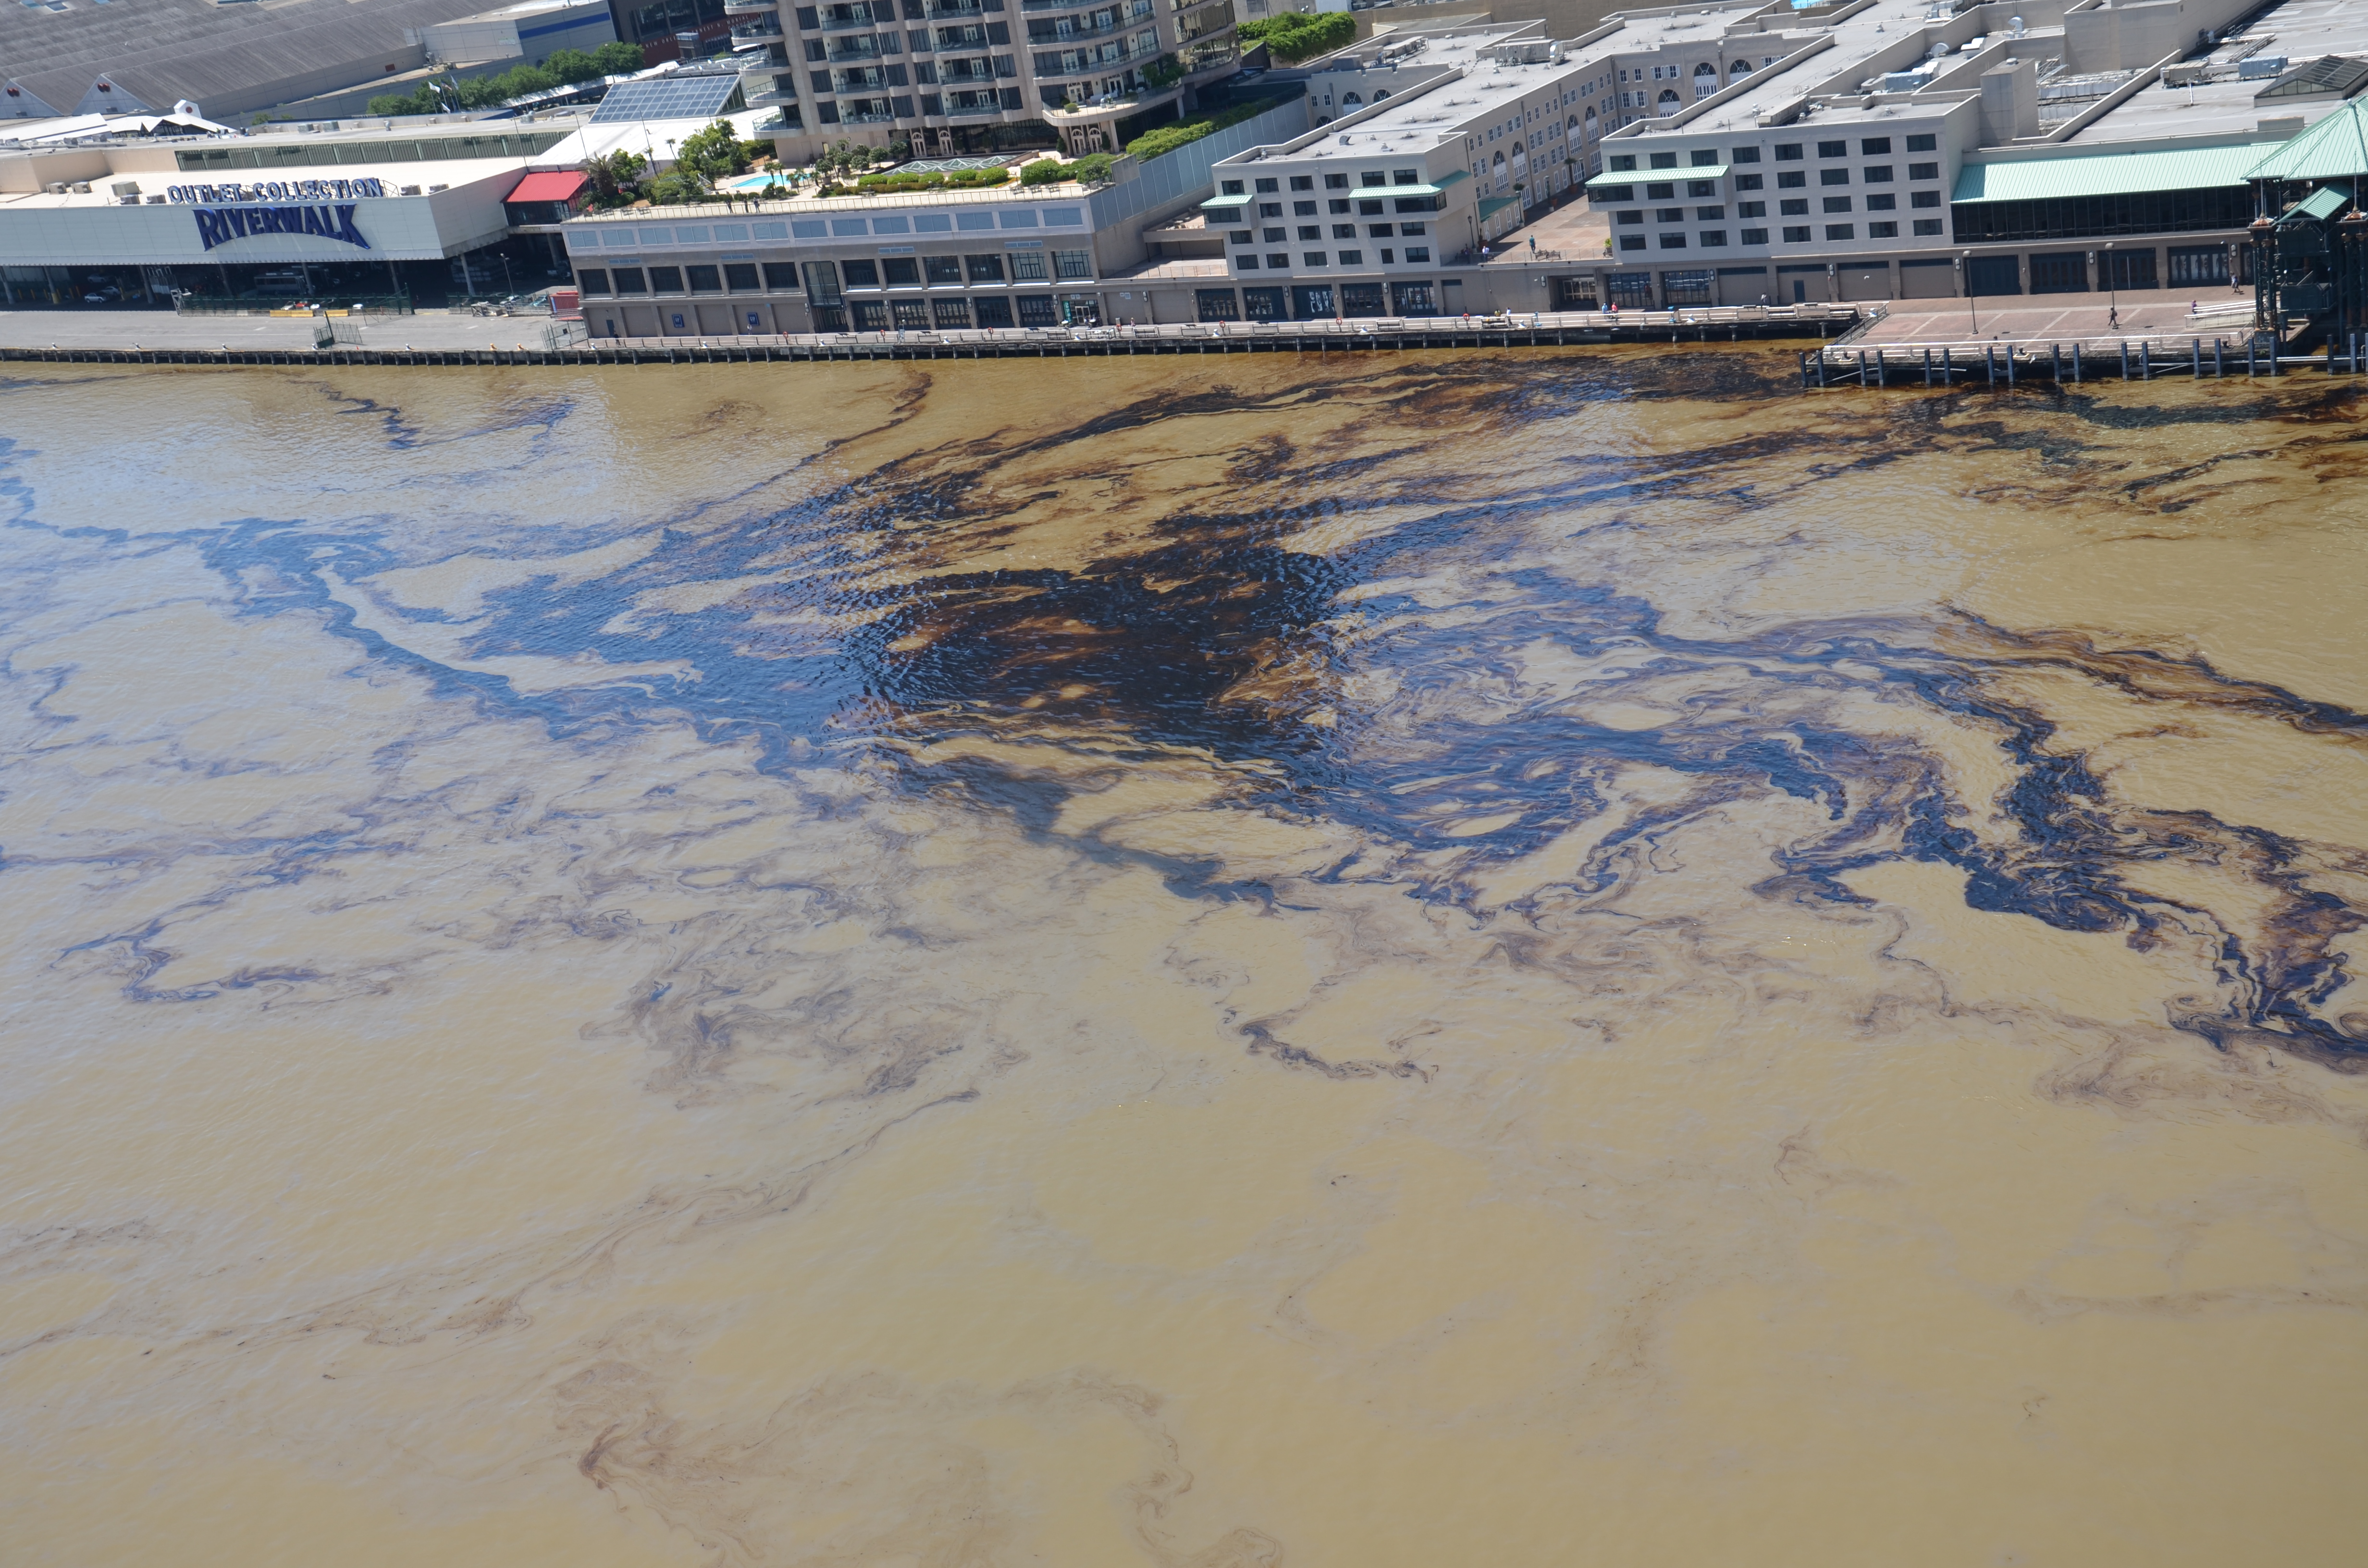 OR&R Responding to Fuel Oil Spill in Mississippi River, New Orleans ...